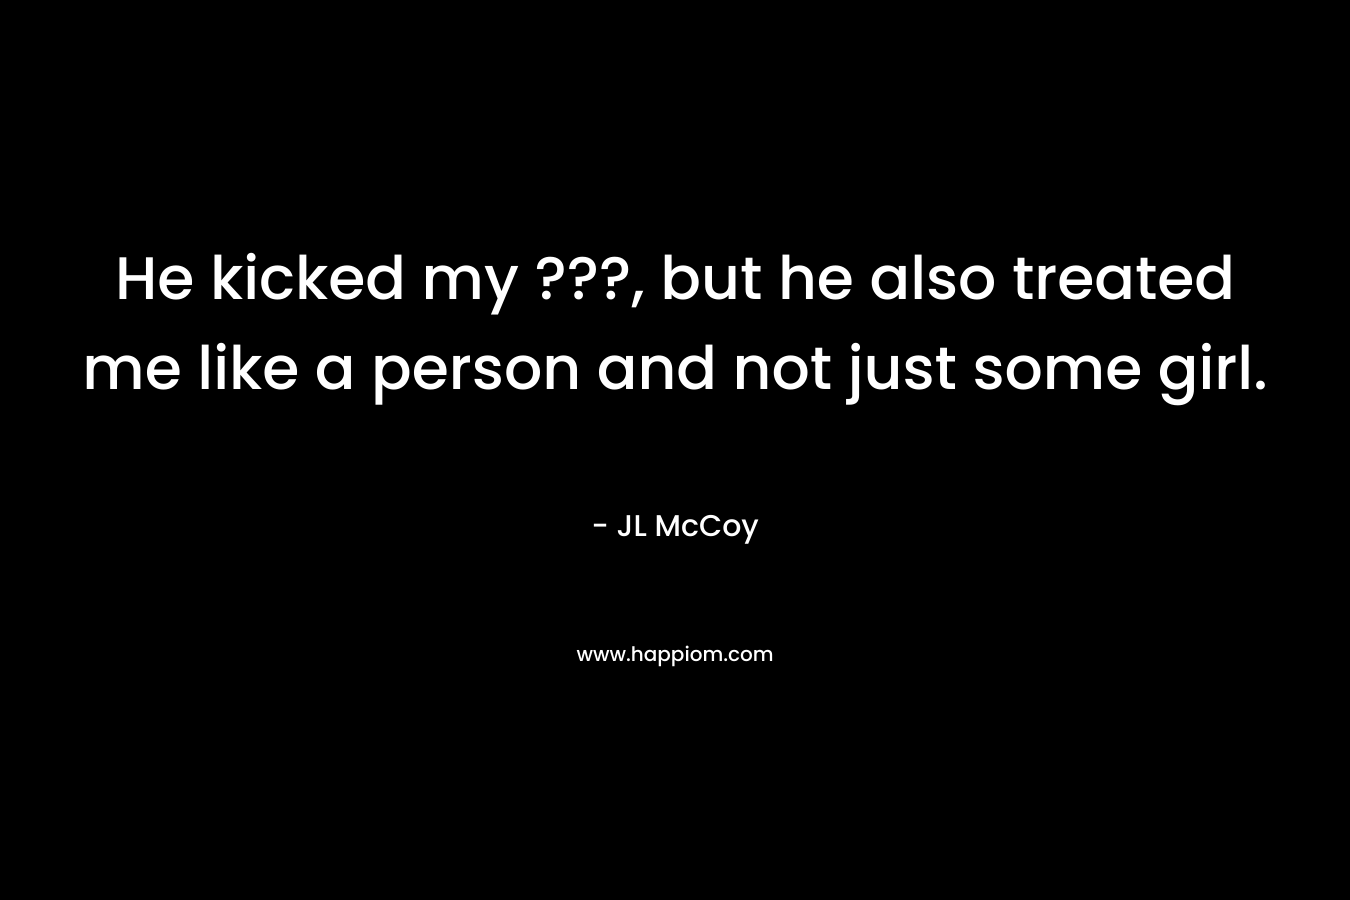 He kicked my ???, but he also treated me like a person and not just some girl.